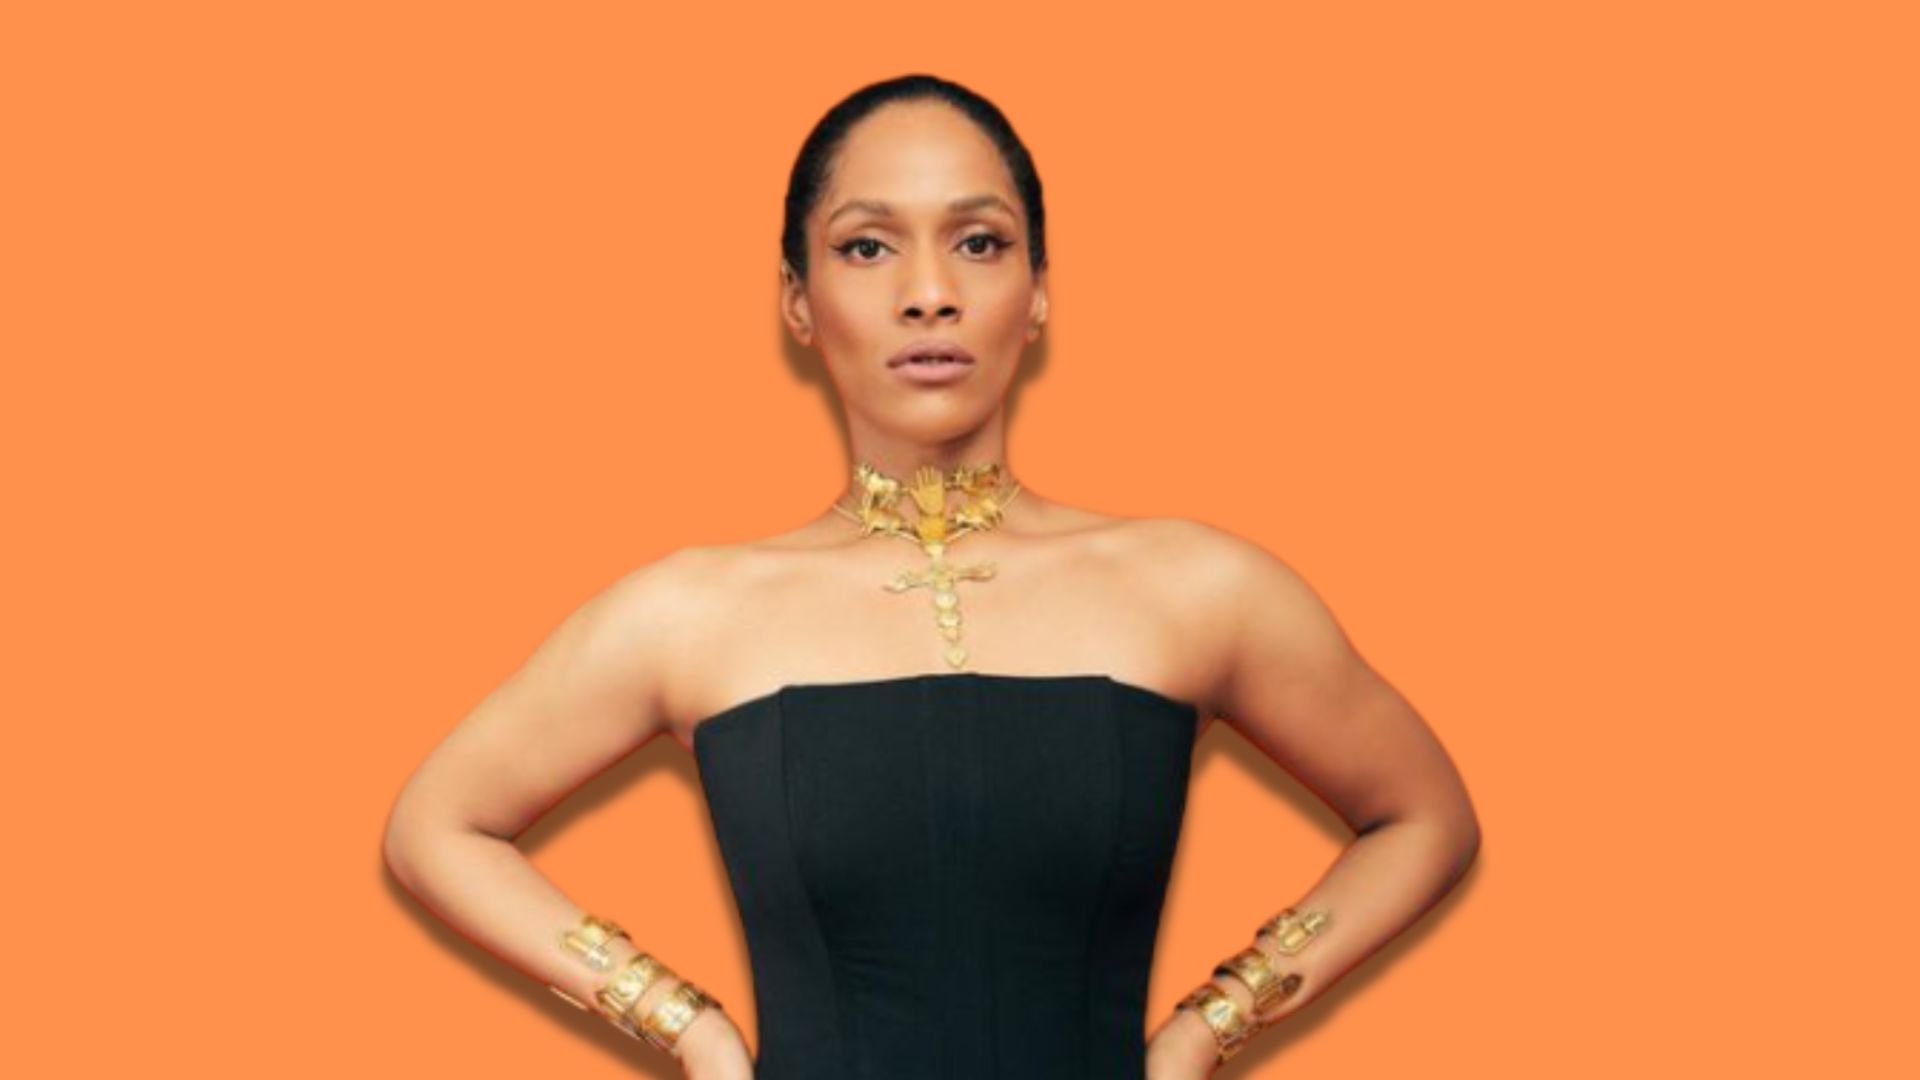 Masaba Gupta Says Bollywood Sticks To The Same 10 Actors They’ve Always Been Casting. IKR?